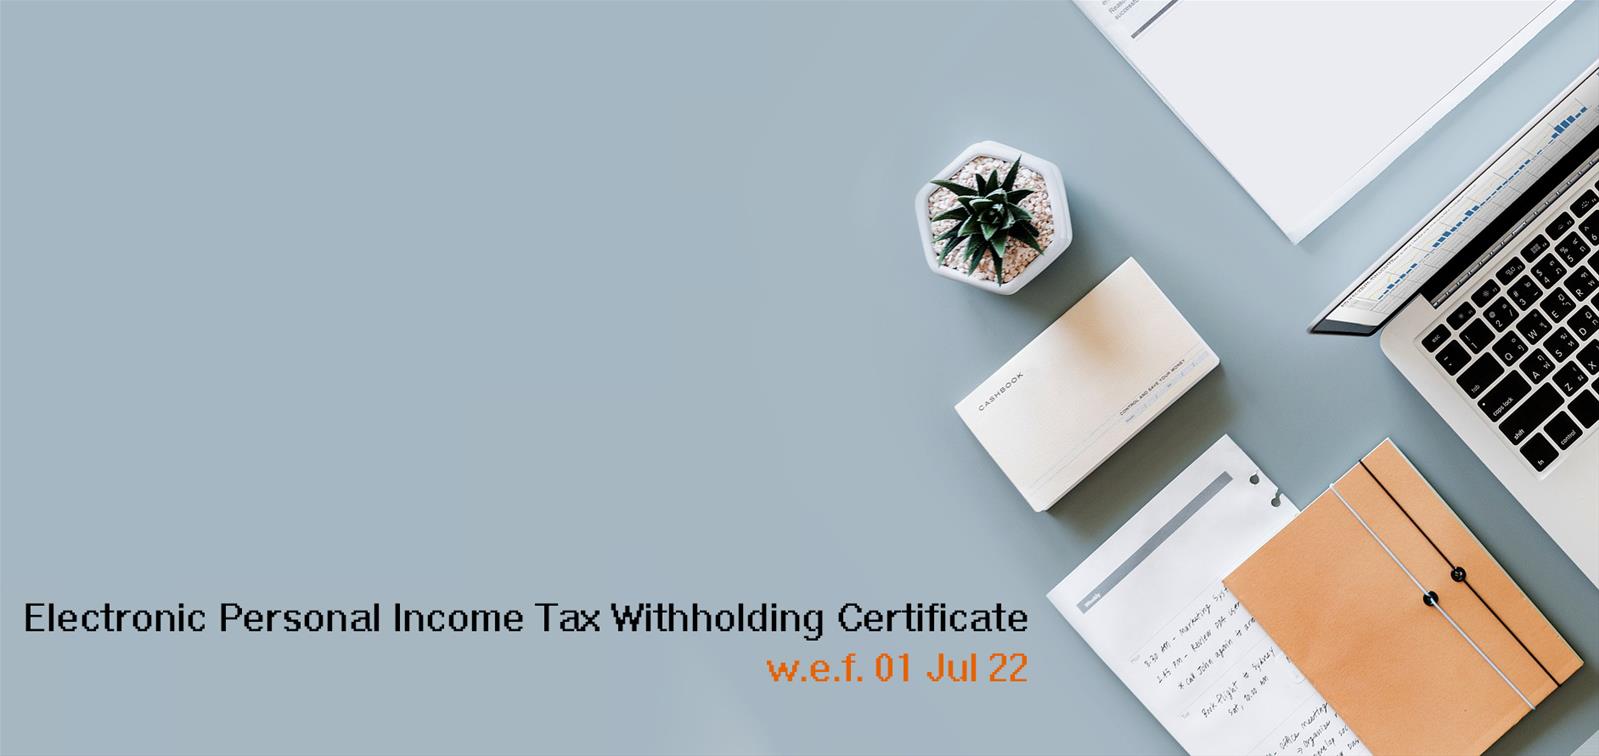 Electronic Personal Income Tax Withholding Certificate